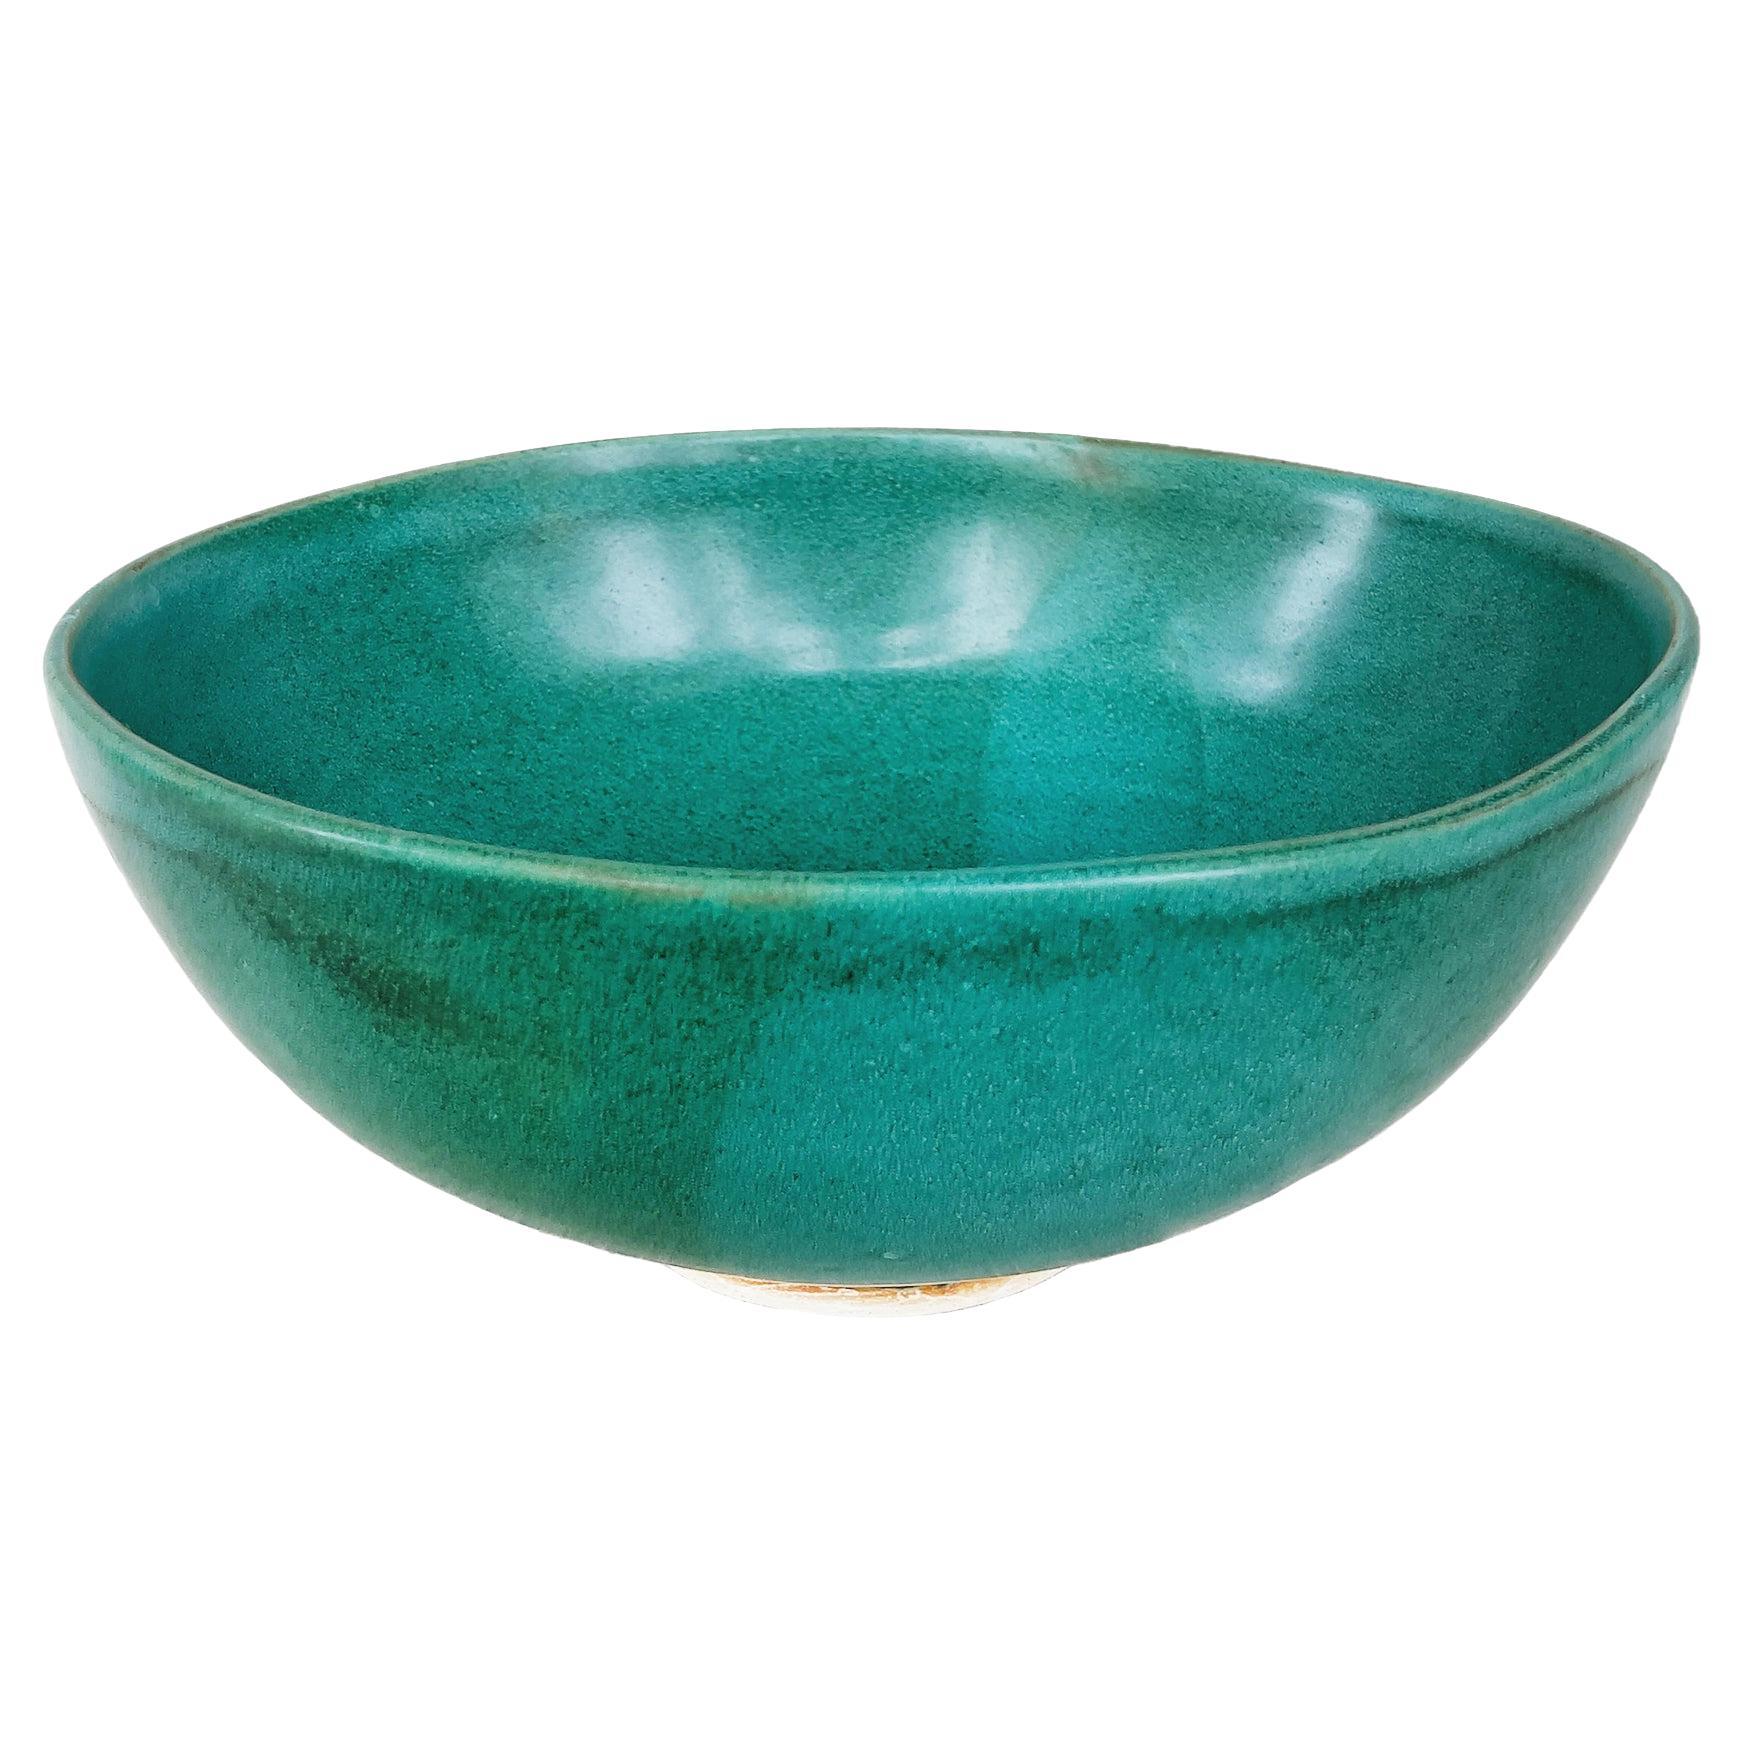 Thom Lussier Ceramic Bowl #24, from the Oxidized Copper Collection For Sale